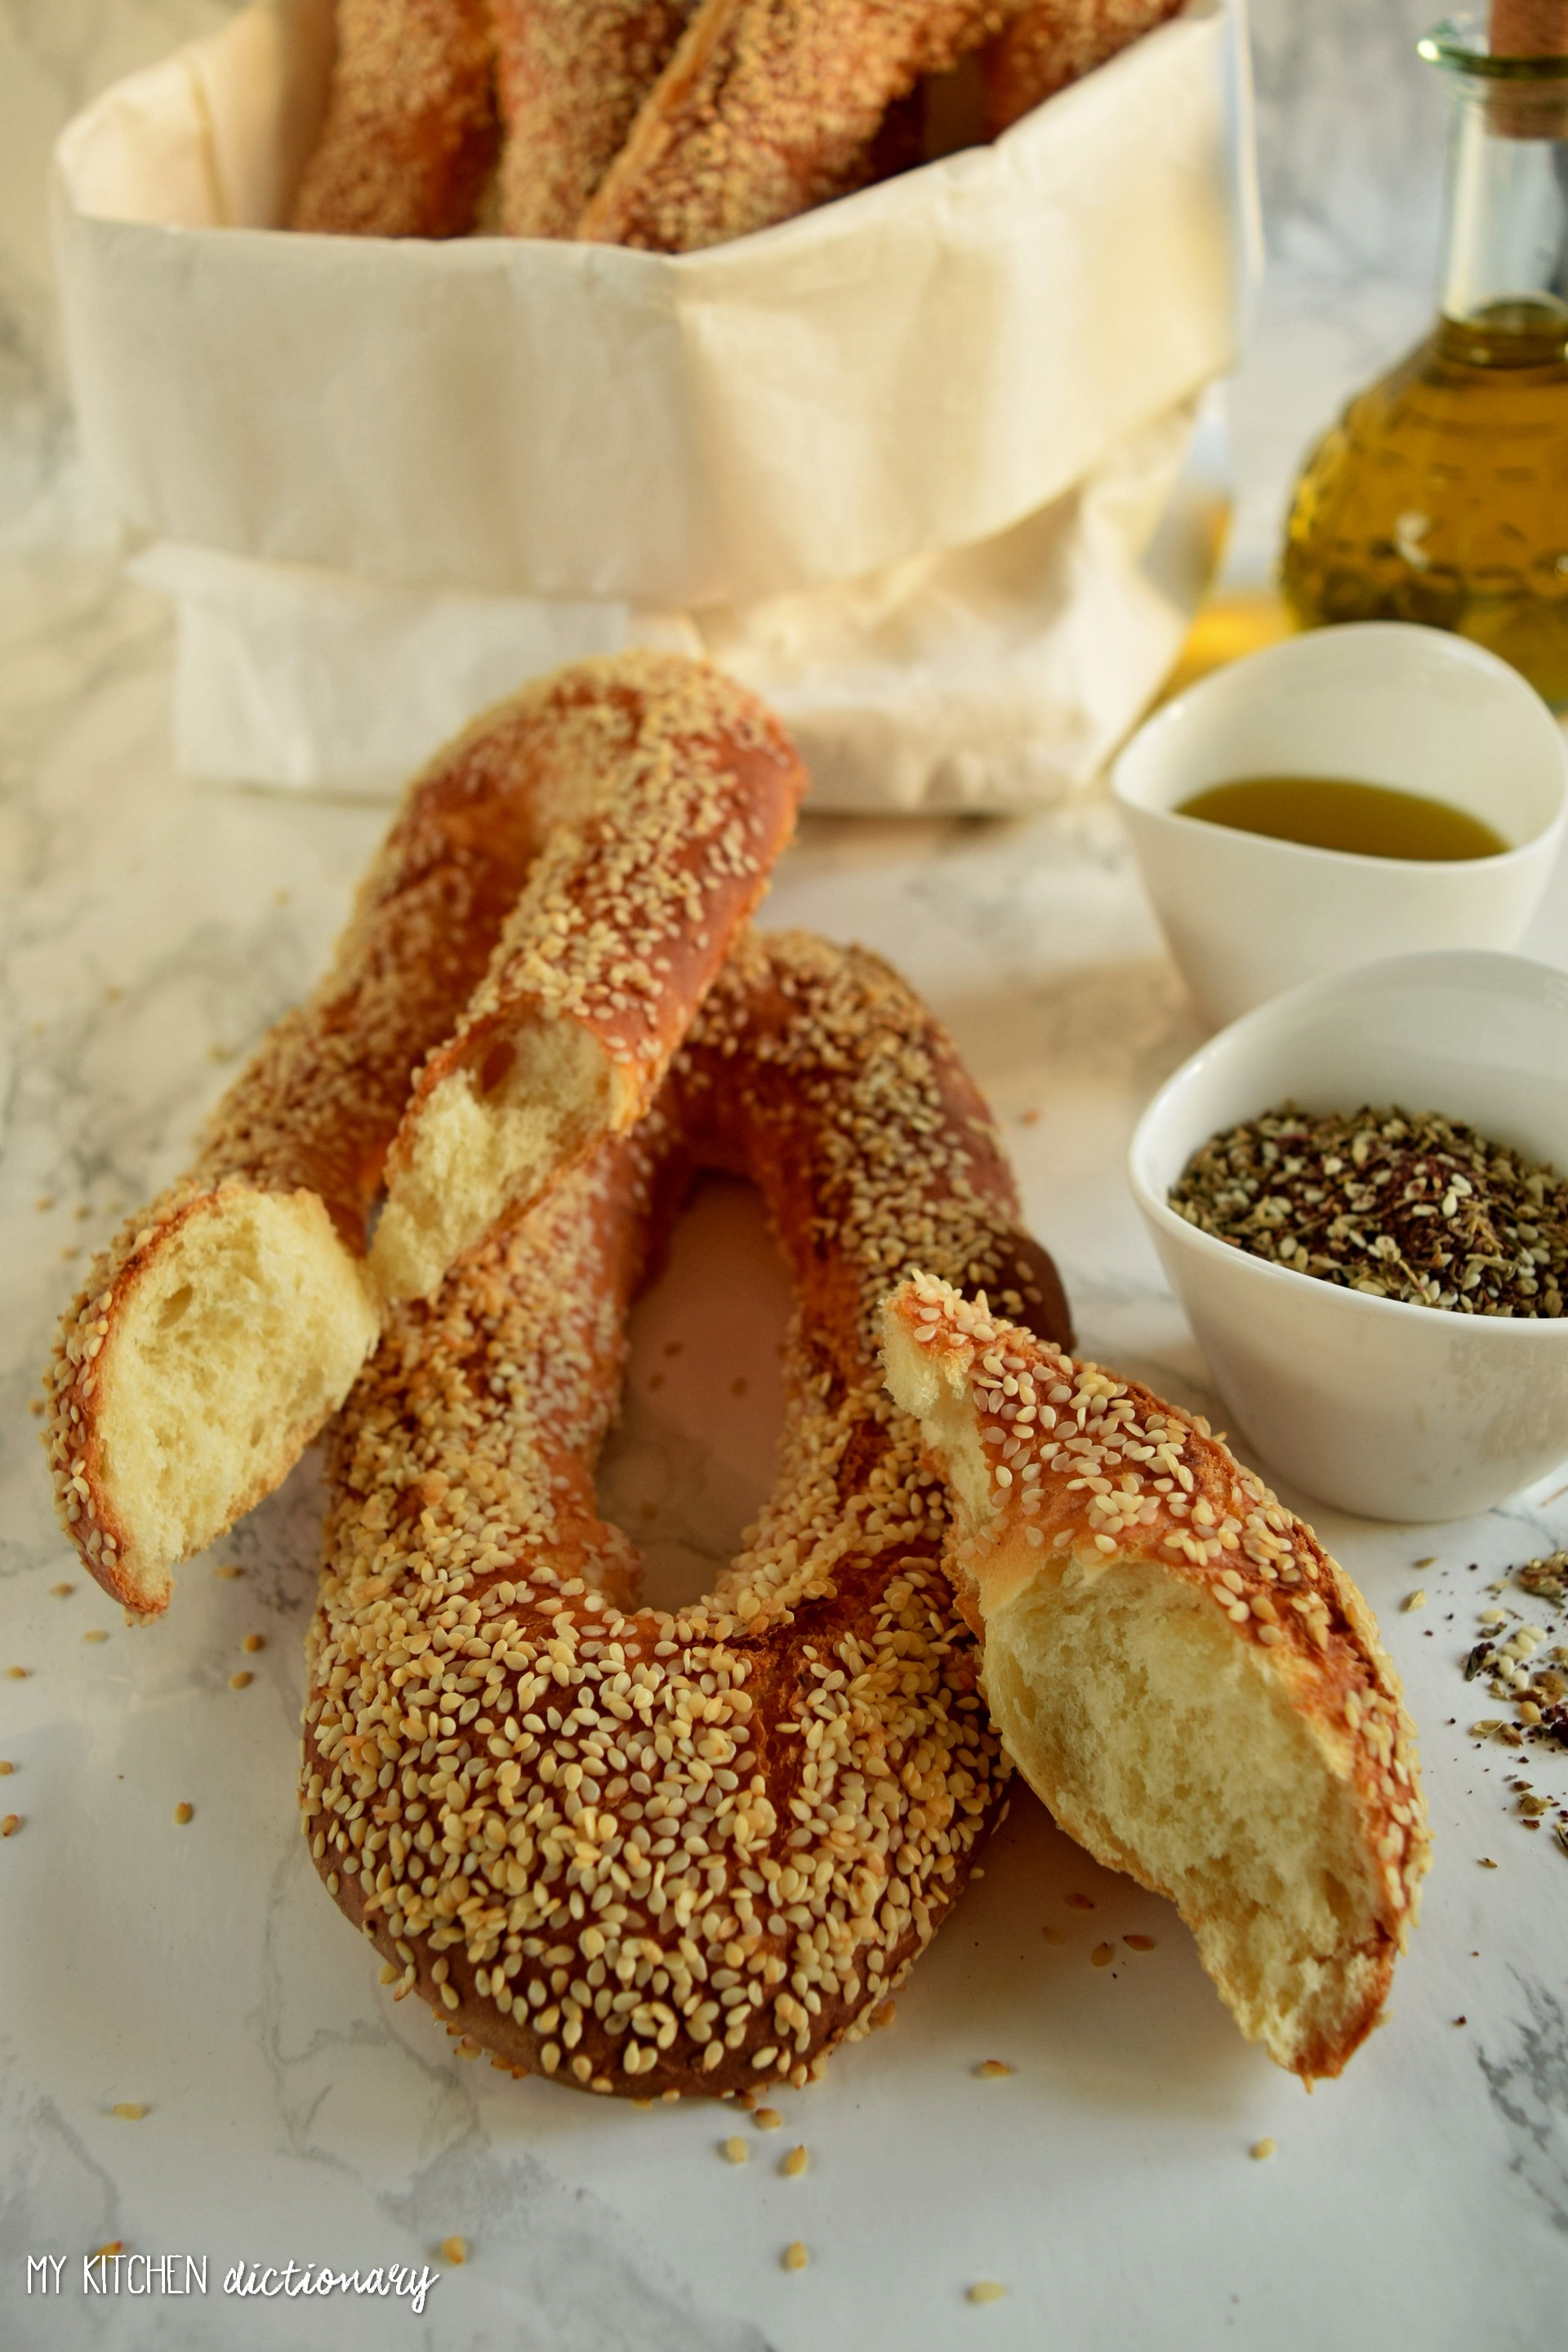 B come Bagel di Gerusalemme - My Kitchen Dictionary